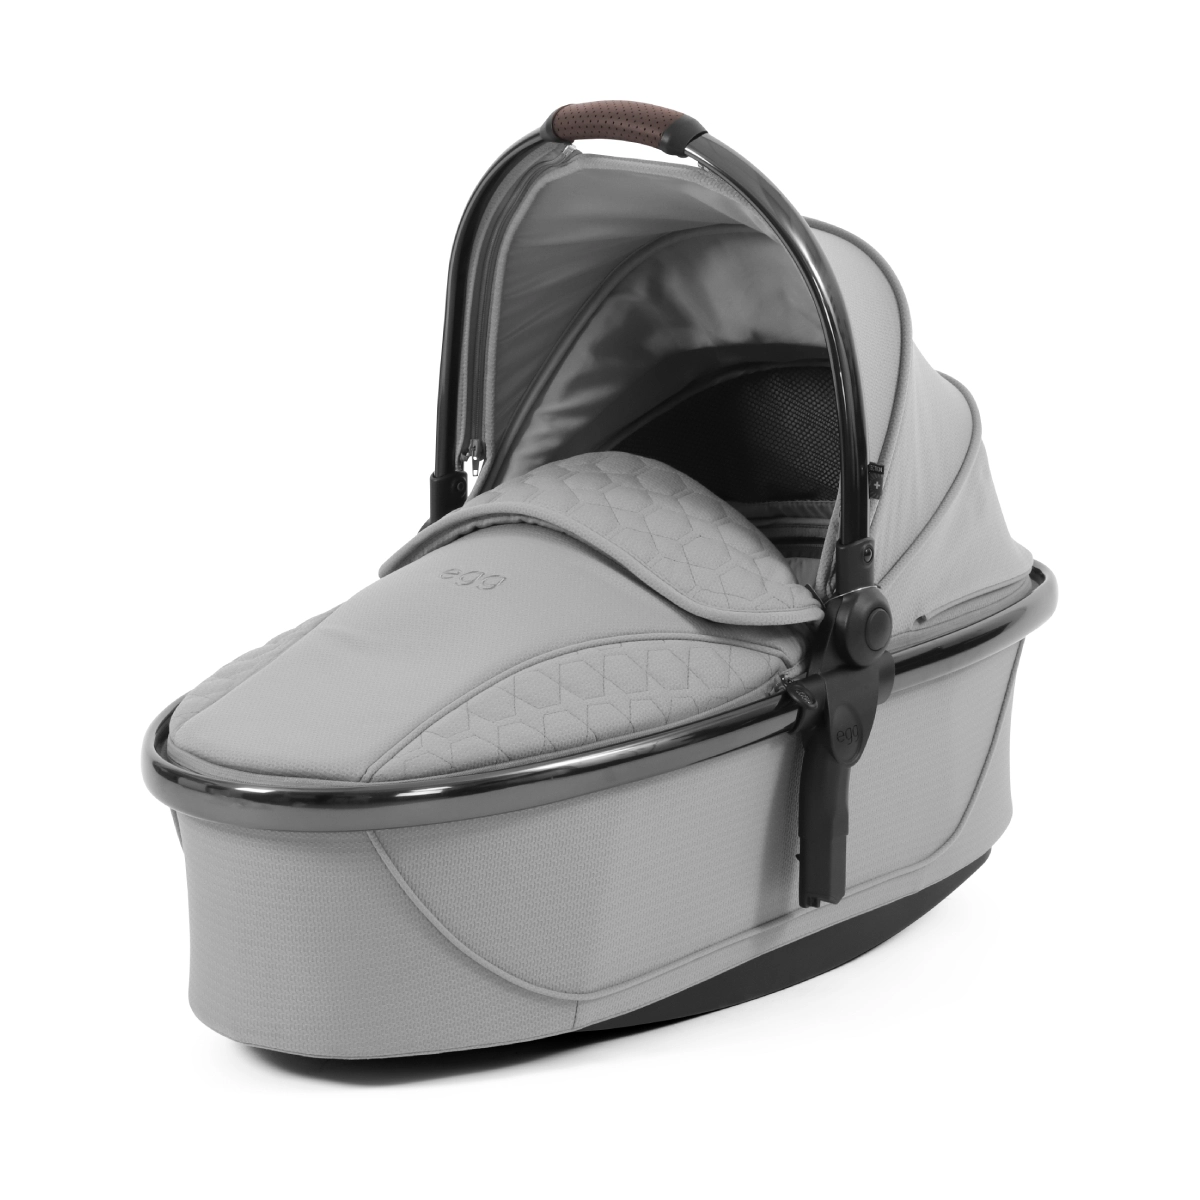 egg® 3 Carrycot